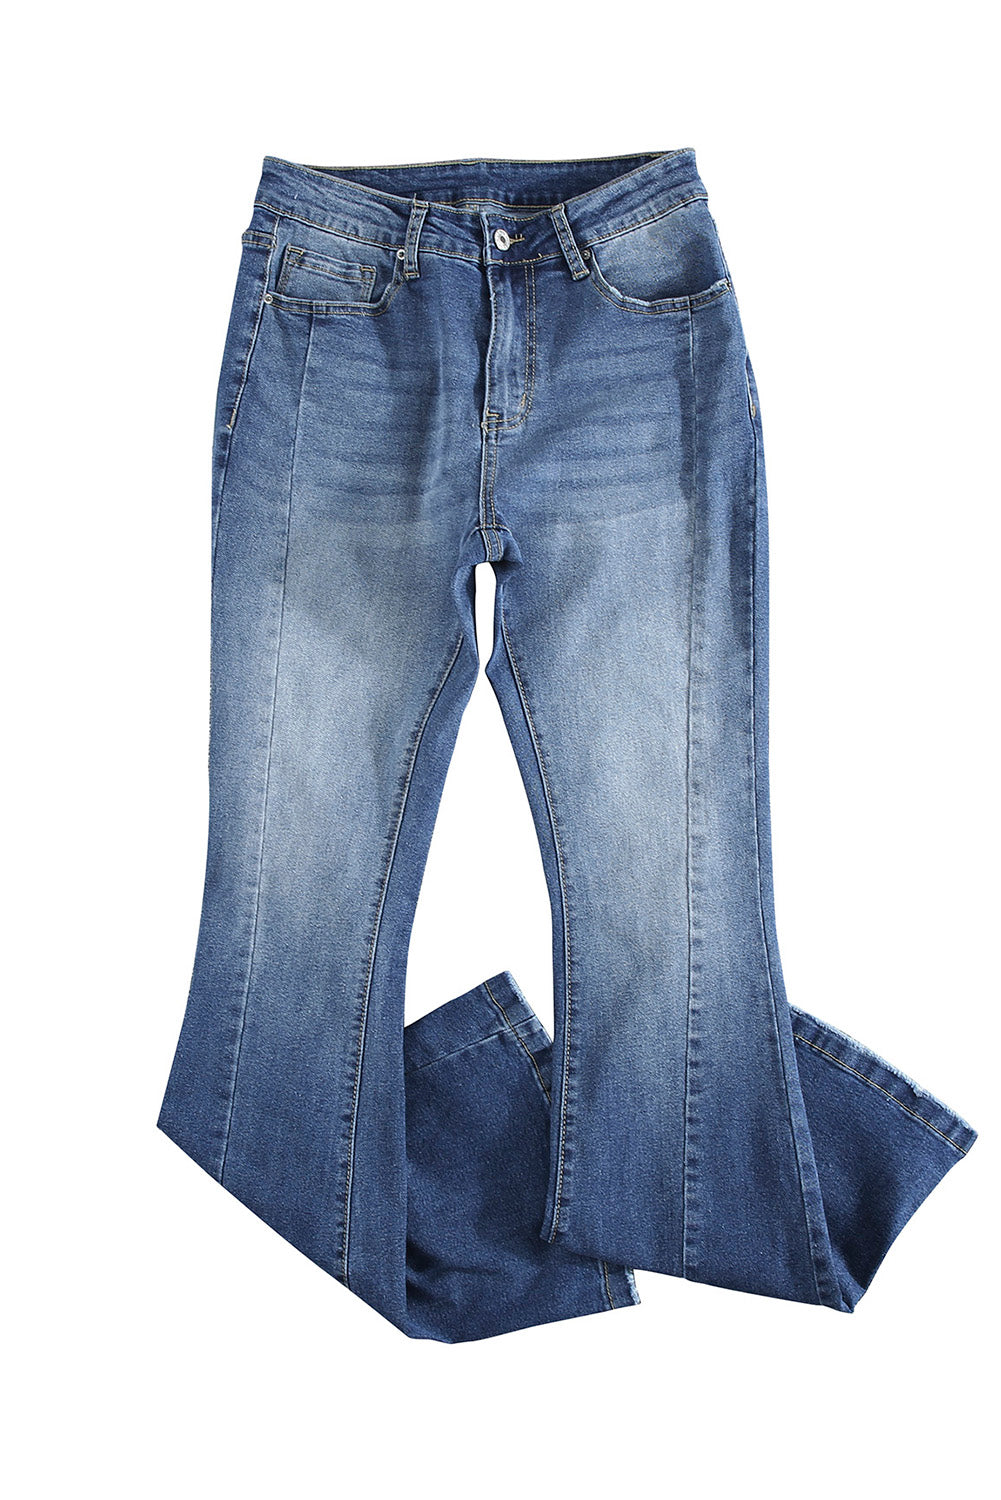 High Waist Flare Jeans with Pockets Jeans JT's Designer Fashion